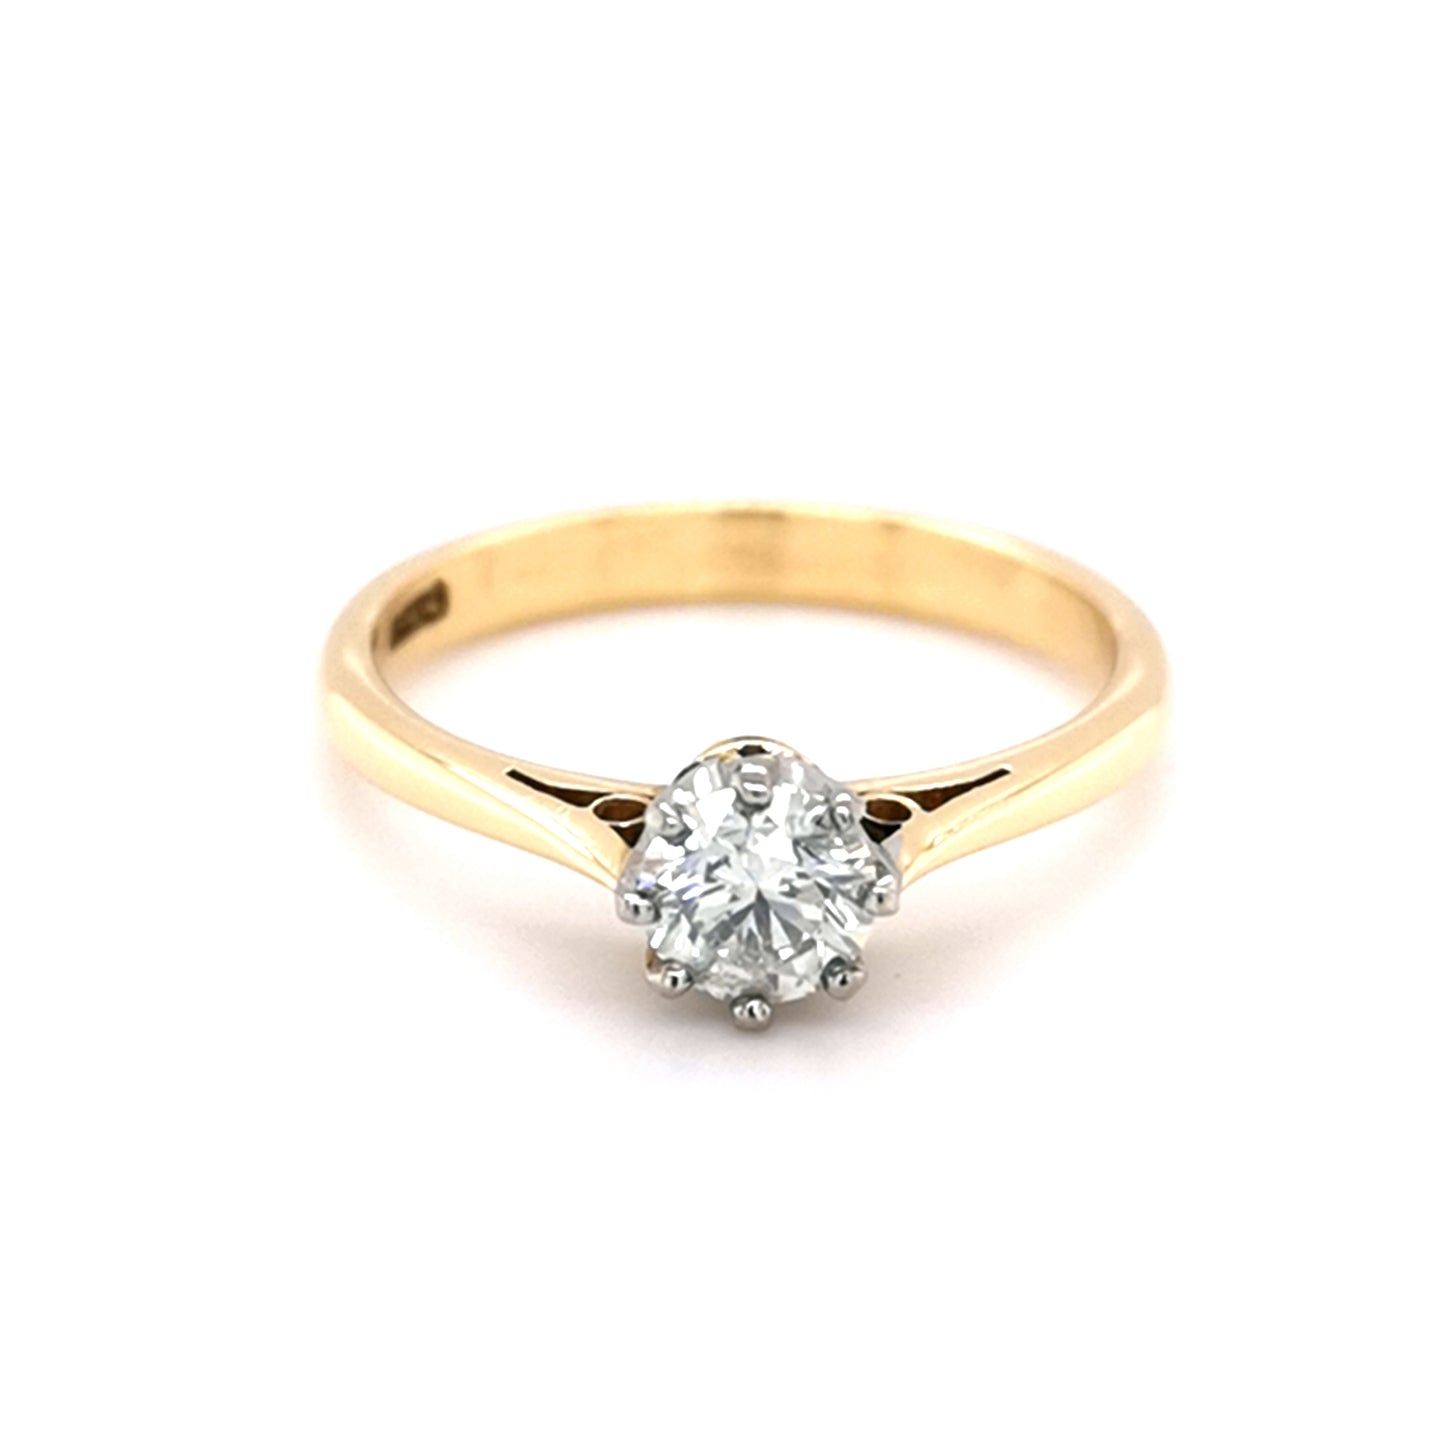 18ct Yellow Gold 8 Claw Solitaire Diamond Ring